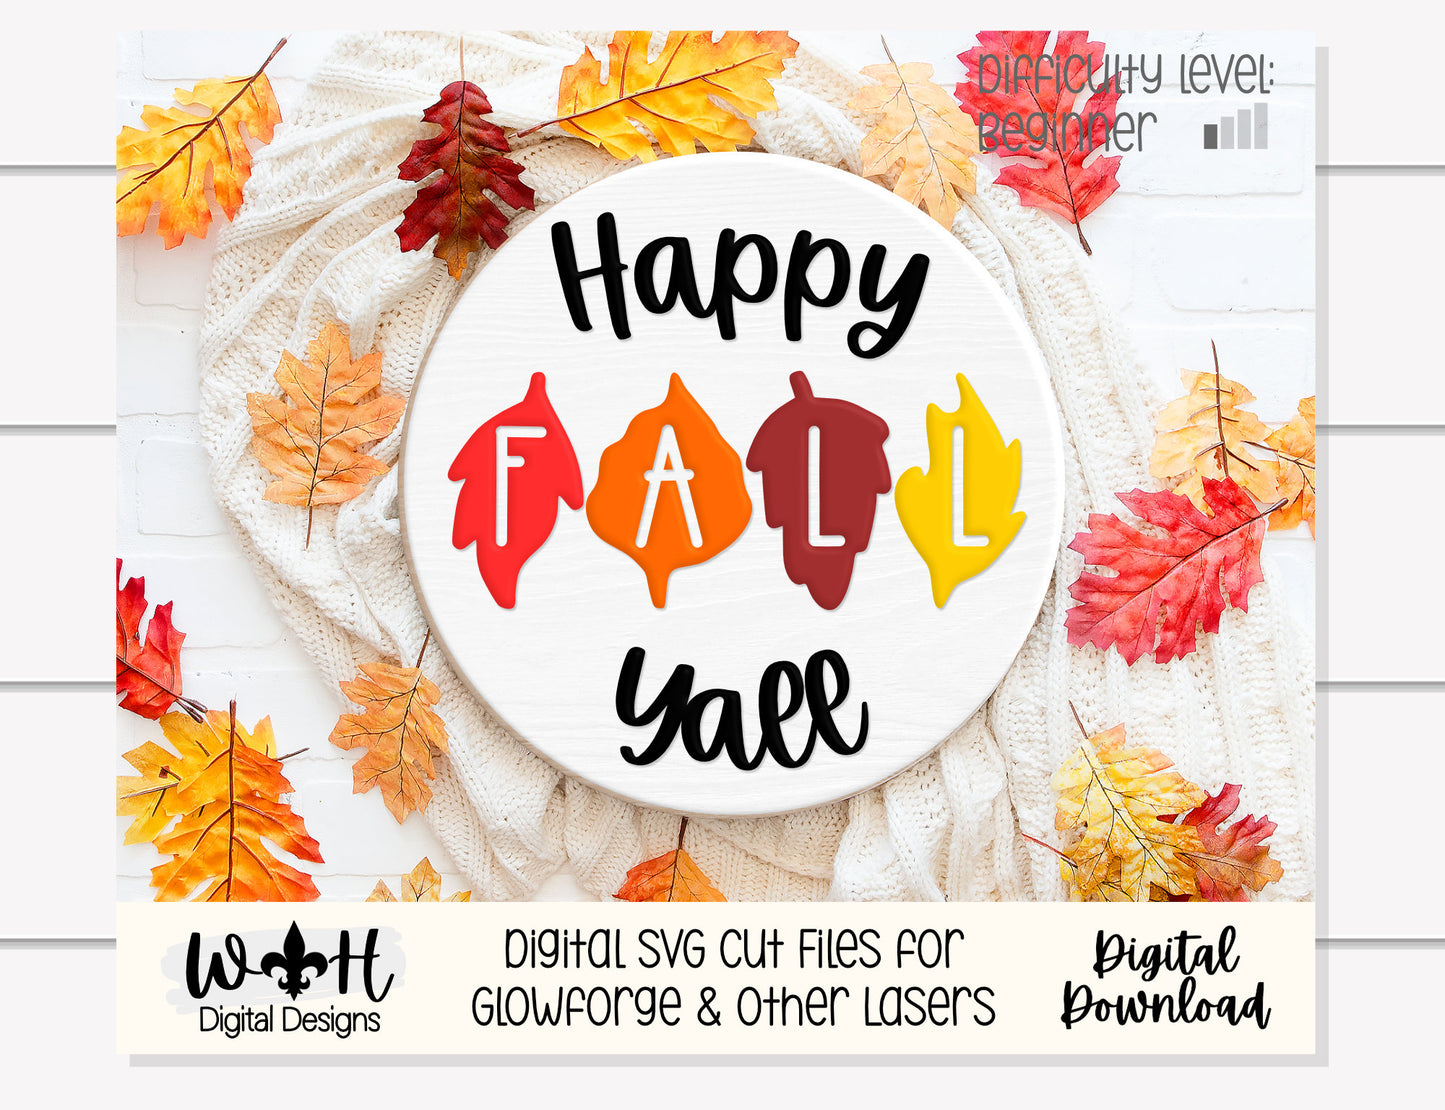 Happy Fall Yall In Leaves Autumn Door Hanger Round - Seasonal Sign Making and DIY Kits - Cut File For Glowforge Lasers - Digital SVG File